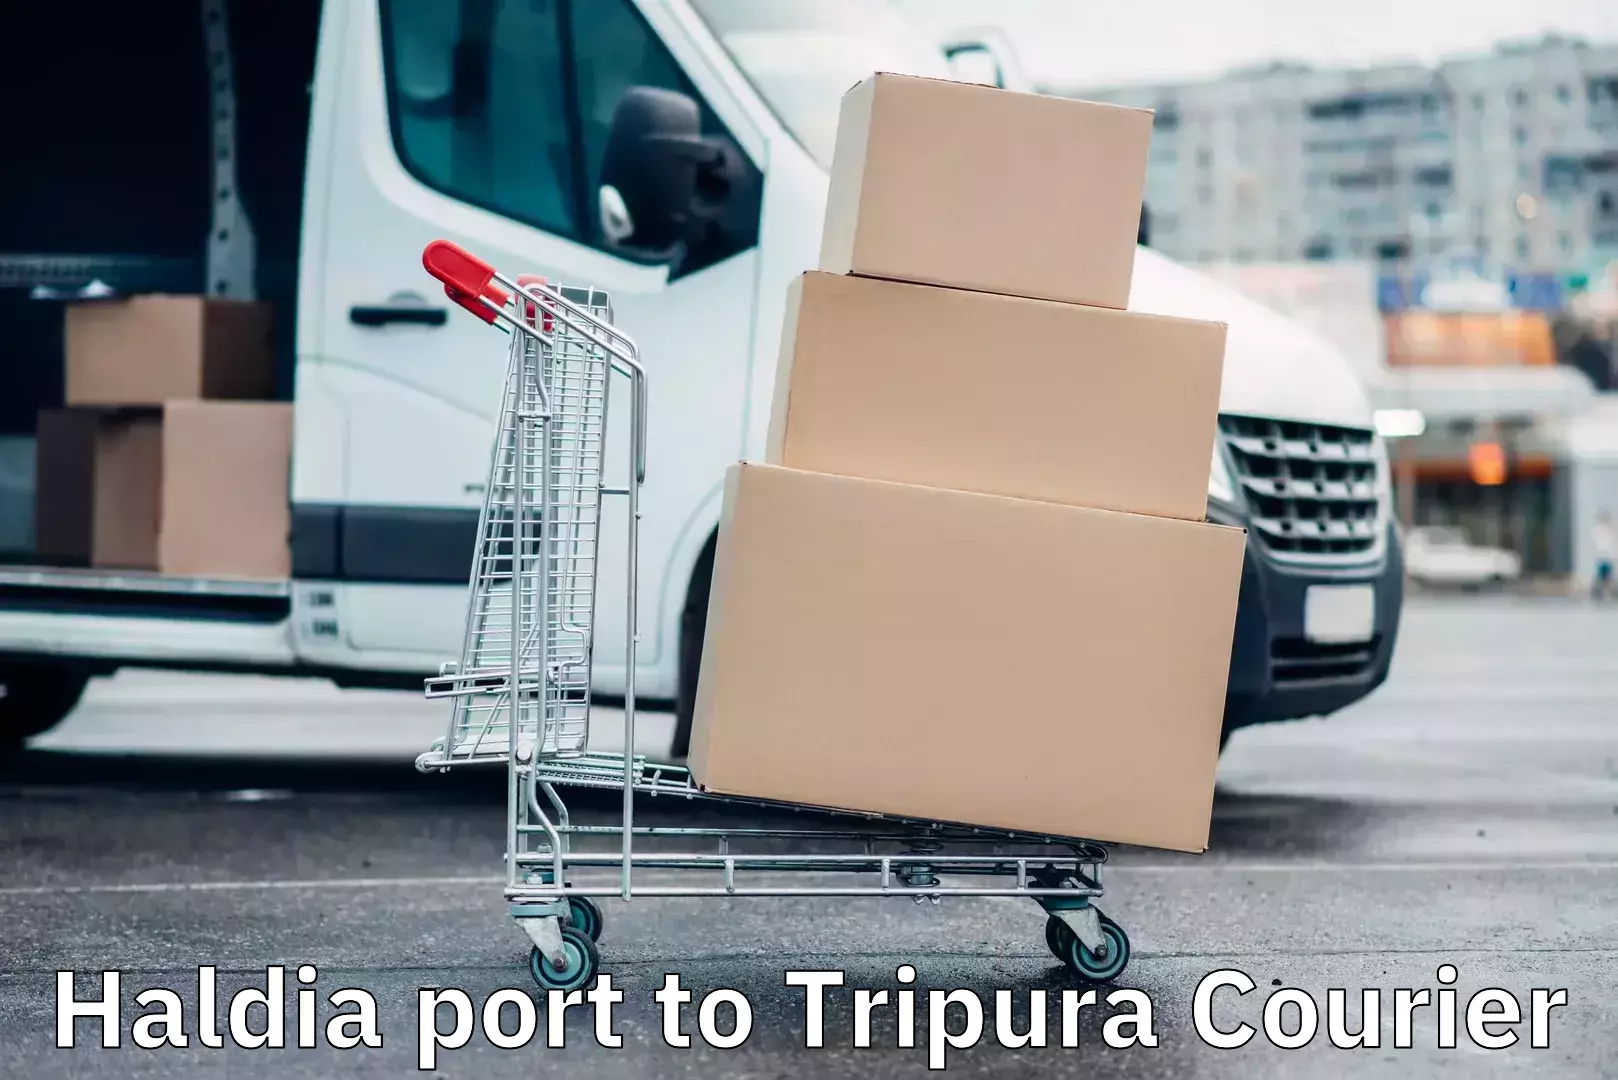 Express delivery solutions Haldia port to Tripura